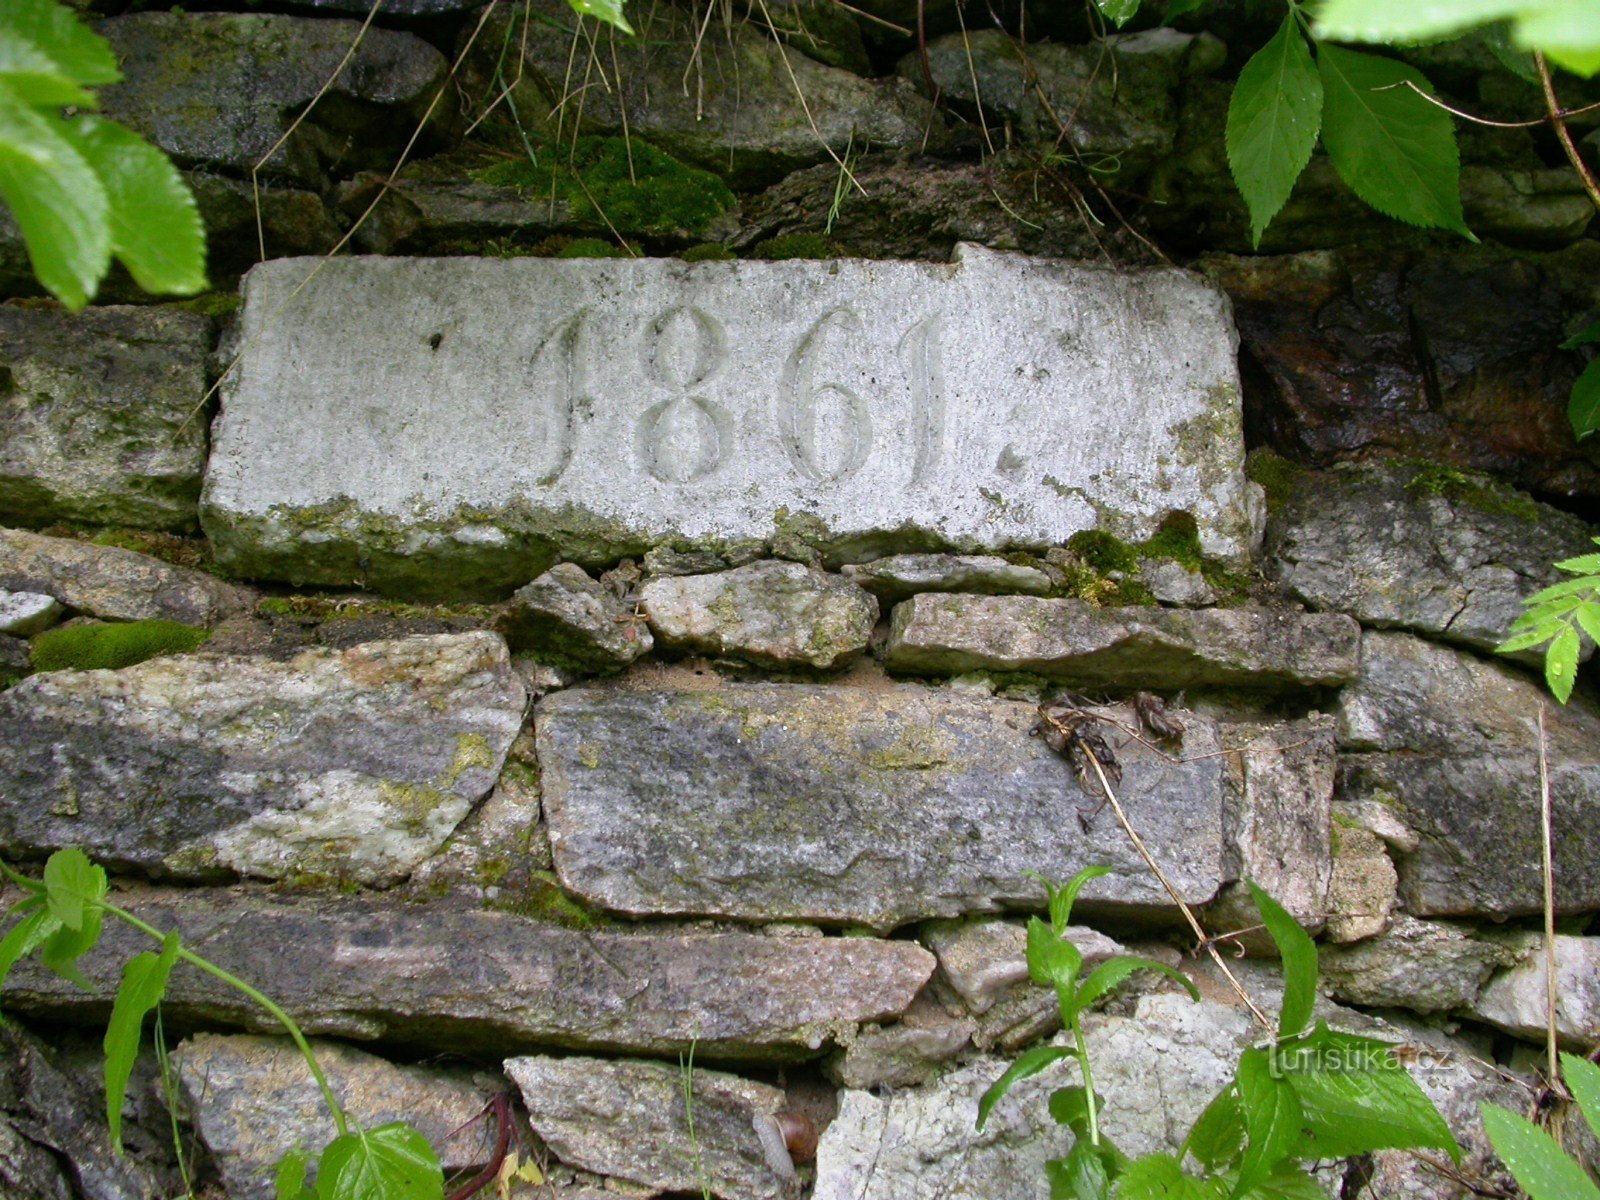 Date on the fence wall near the limestone